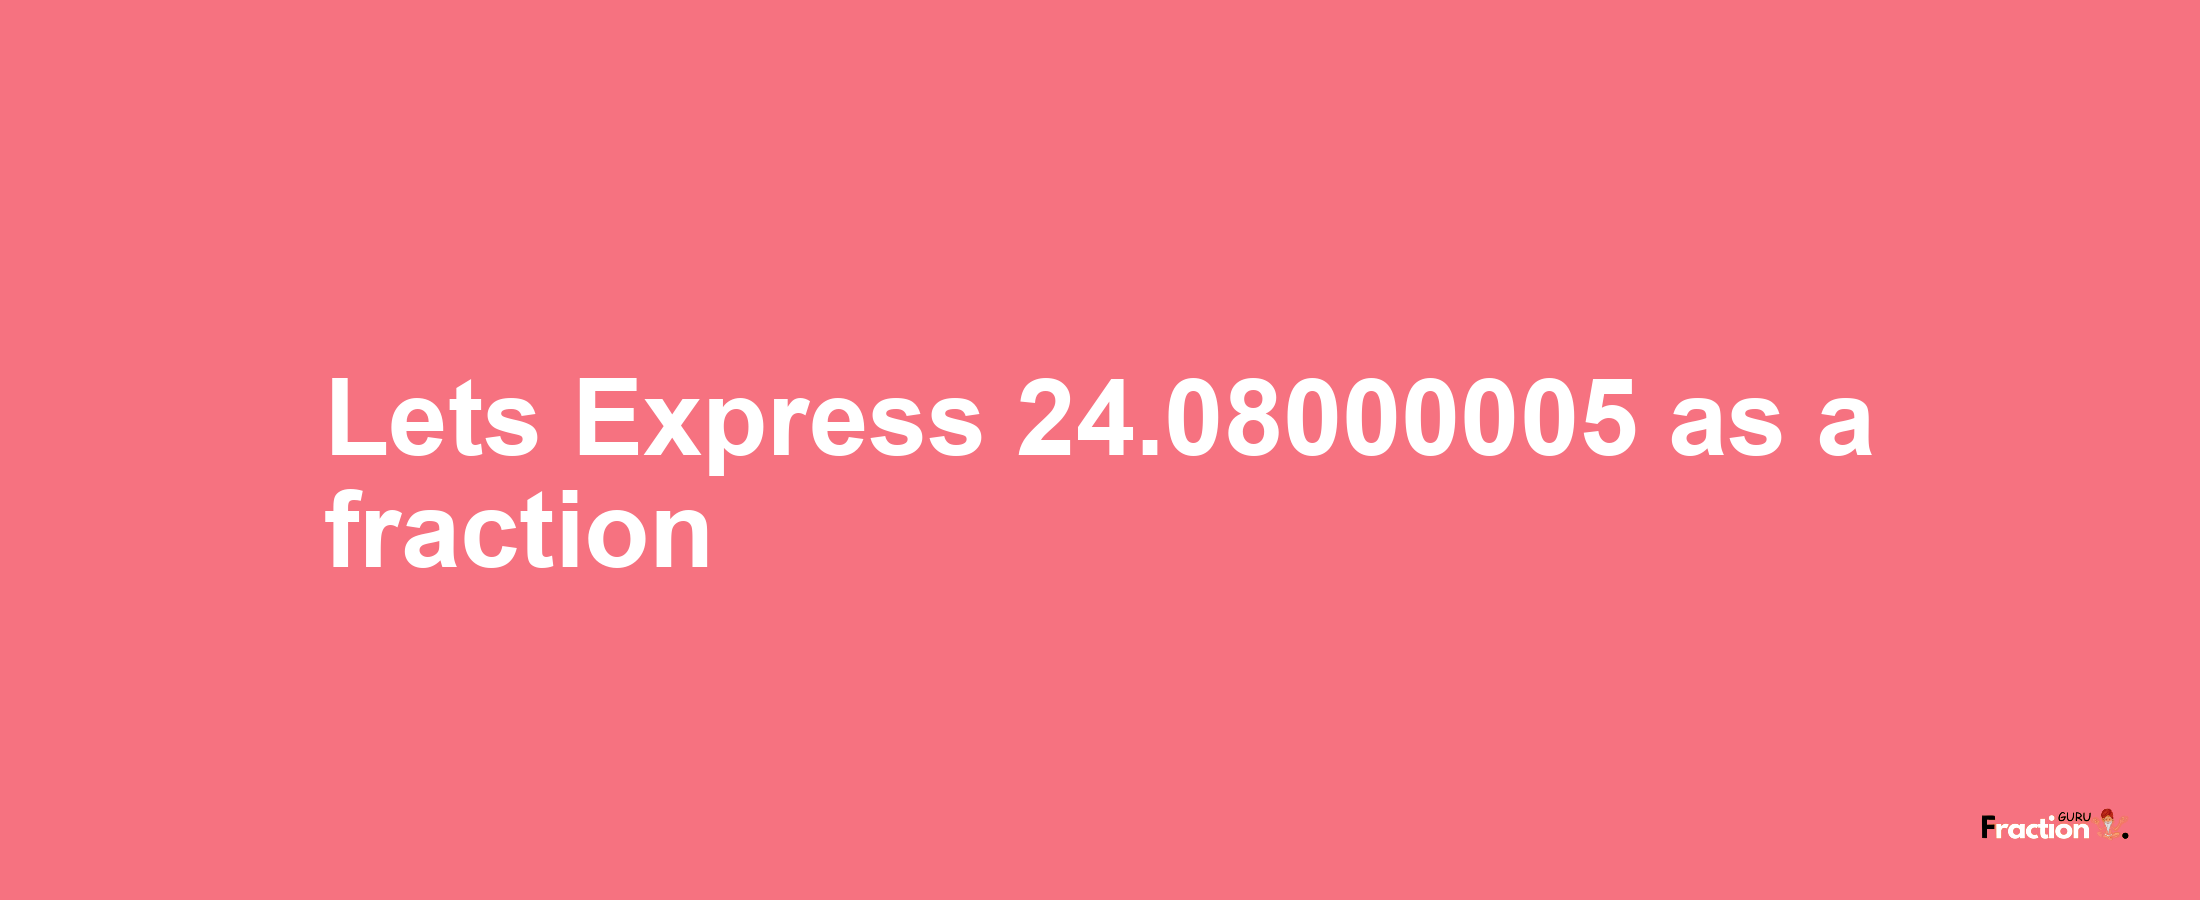 Lets Express 24.08000005 as afraction